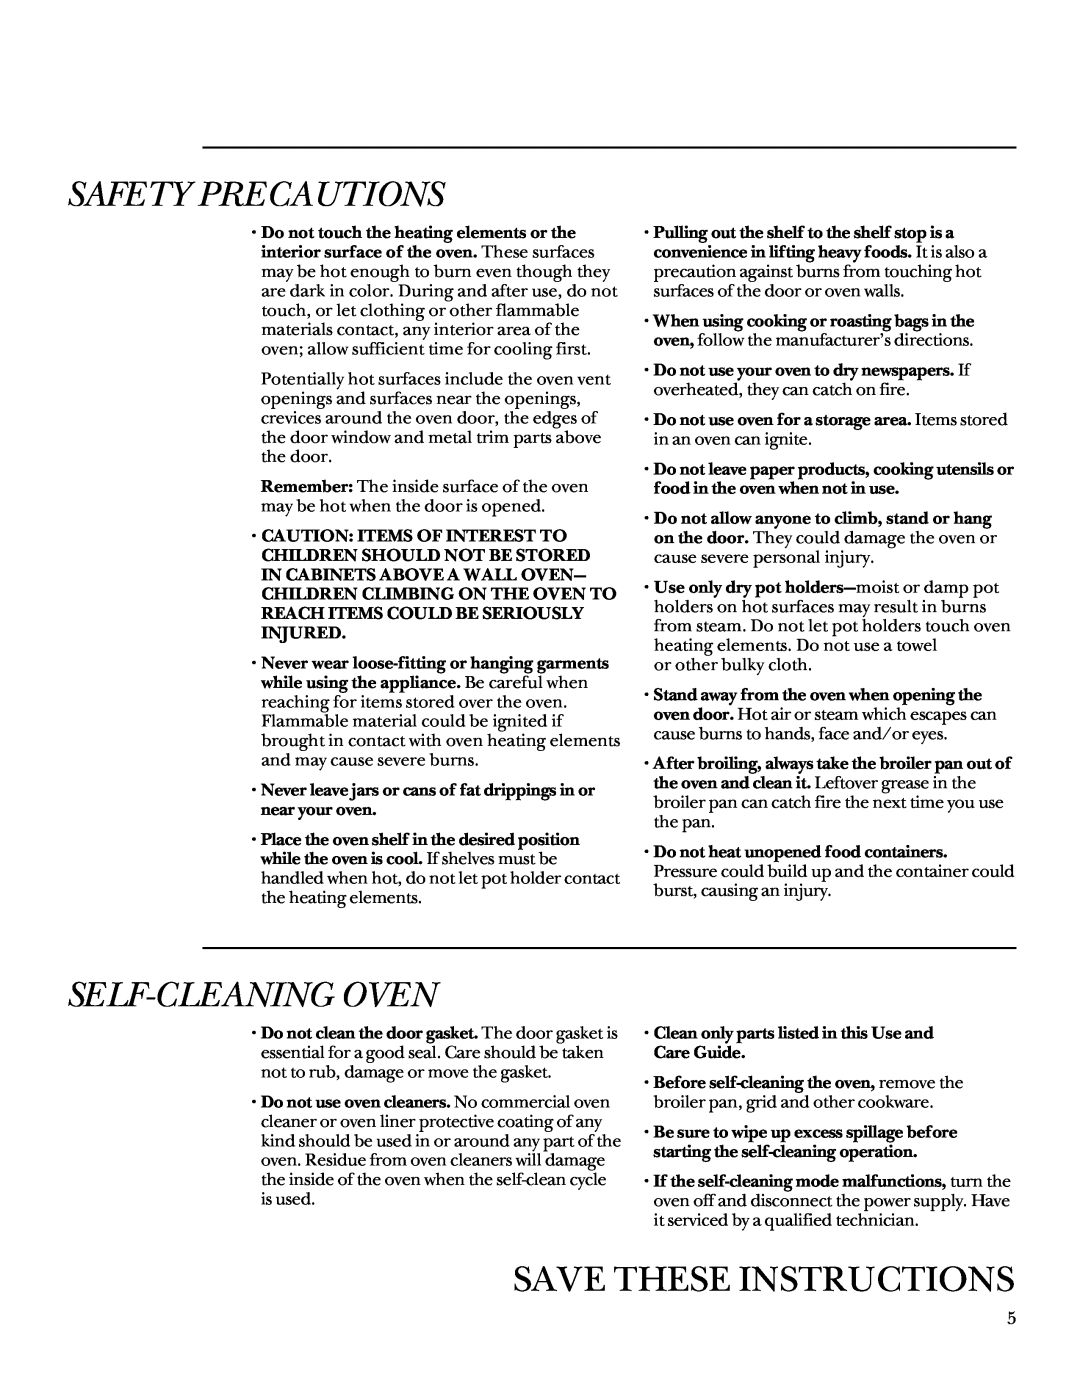 GE 164D3333P095 manual Self-Cleaning Oven, Save These Instructions, Safety Precautions 